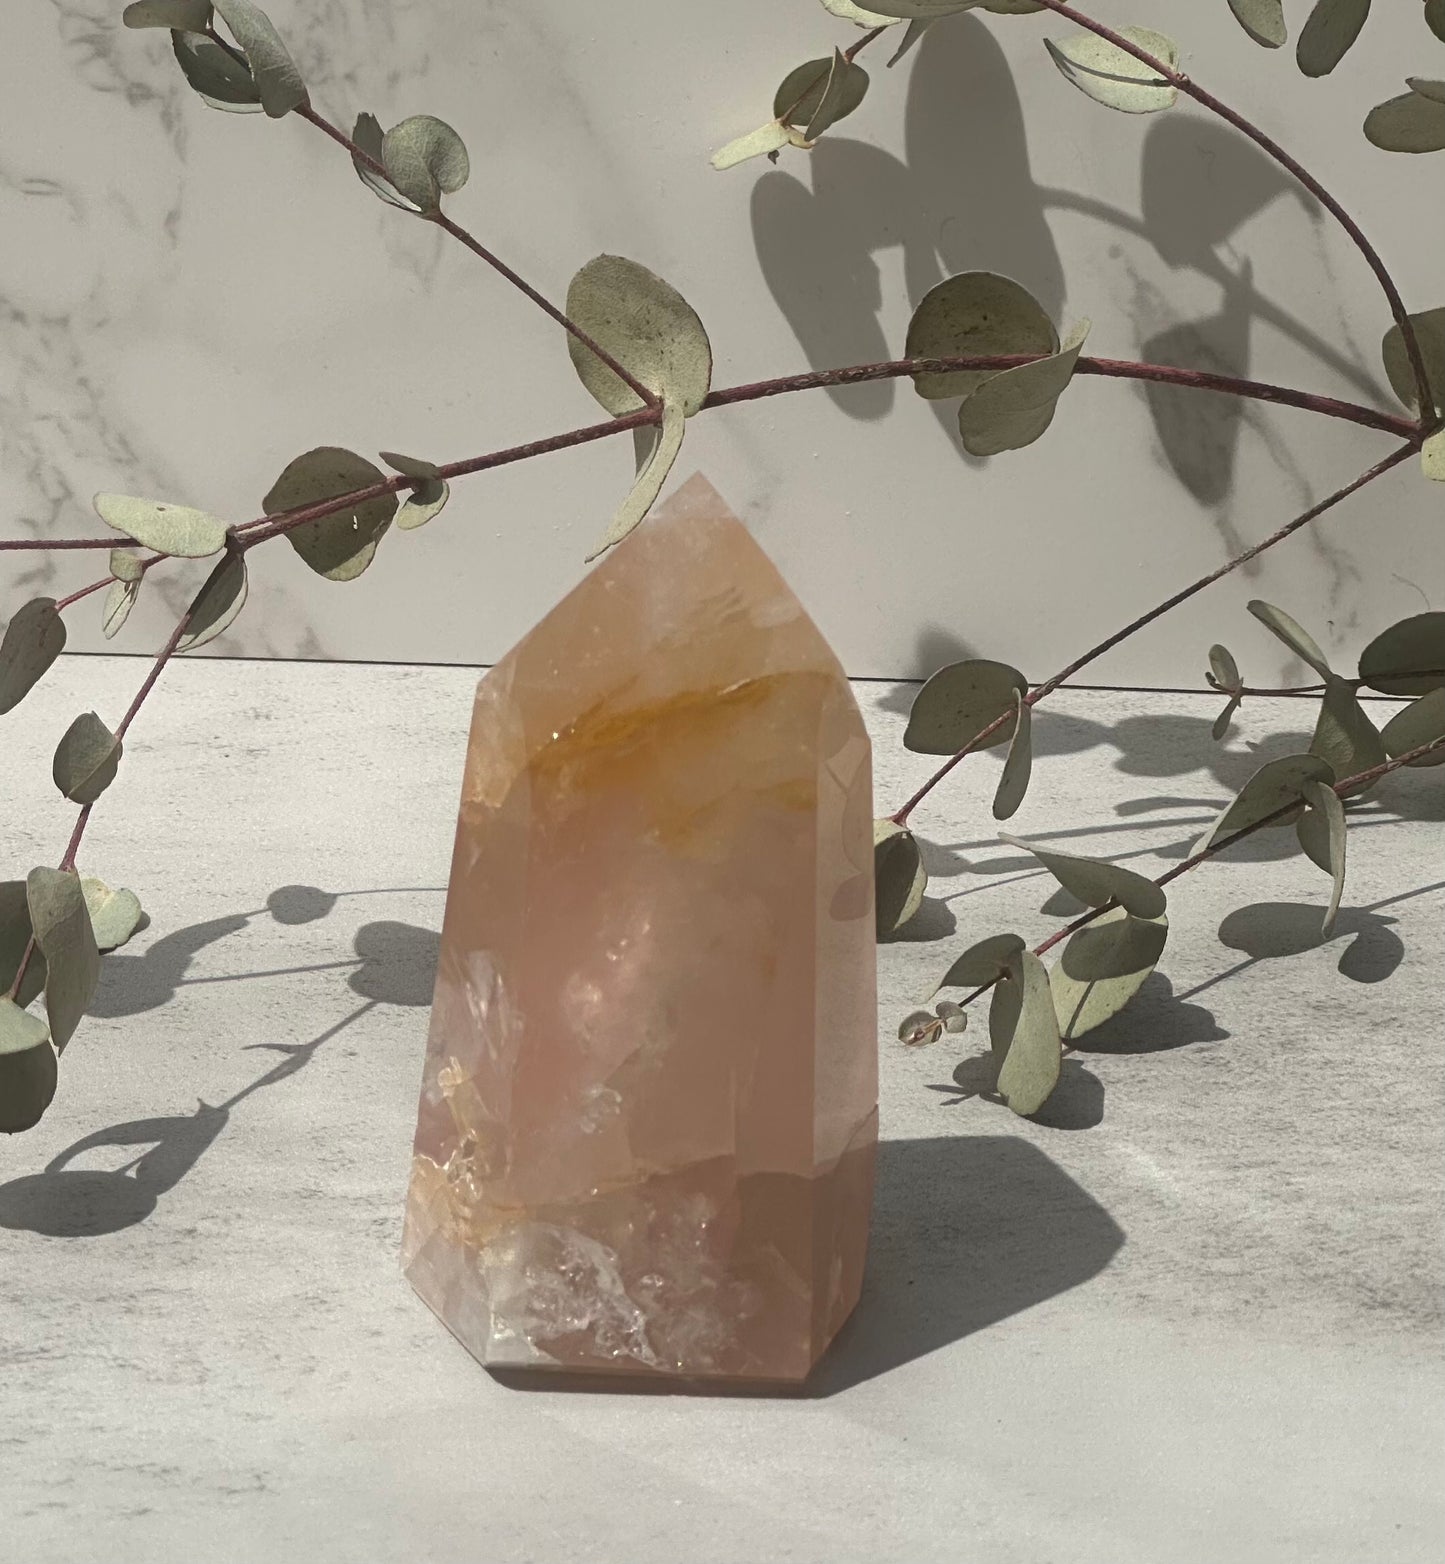 Alluring Rose Quartz with Golden Healer Tower/Point High-Quality Crystal From Brazil